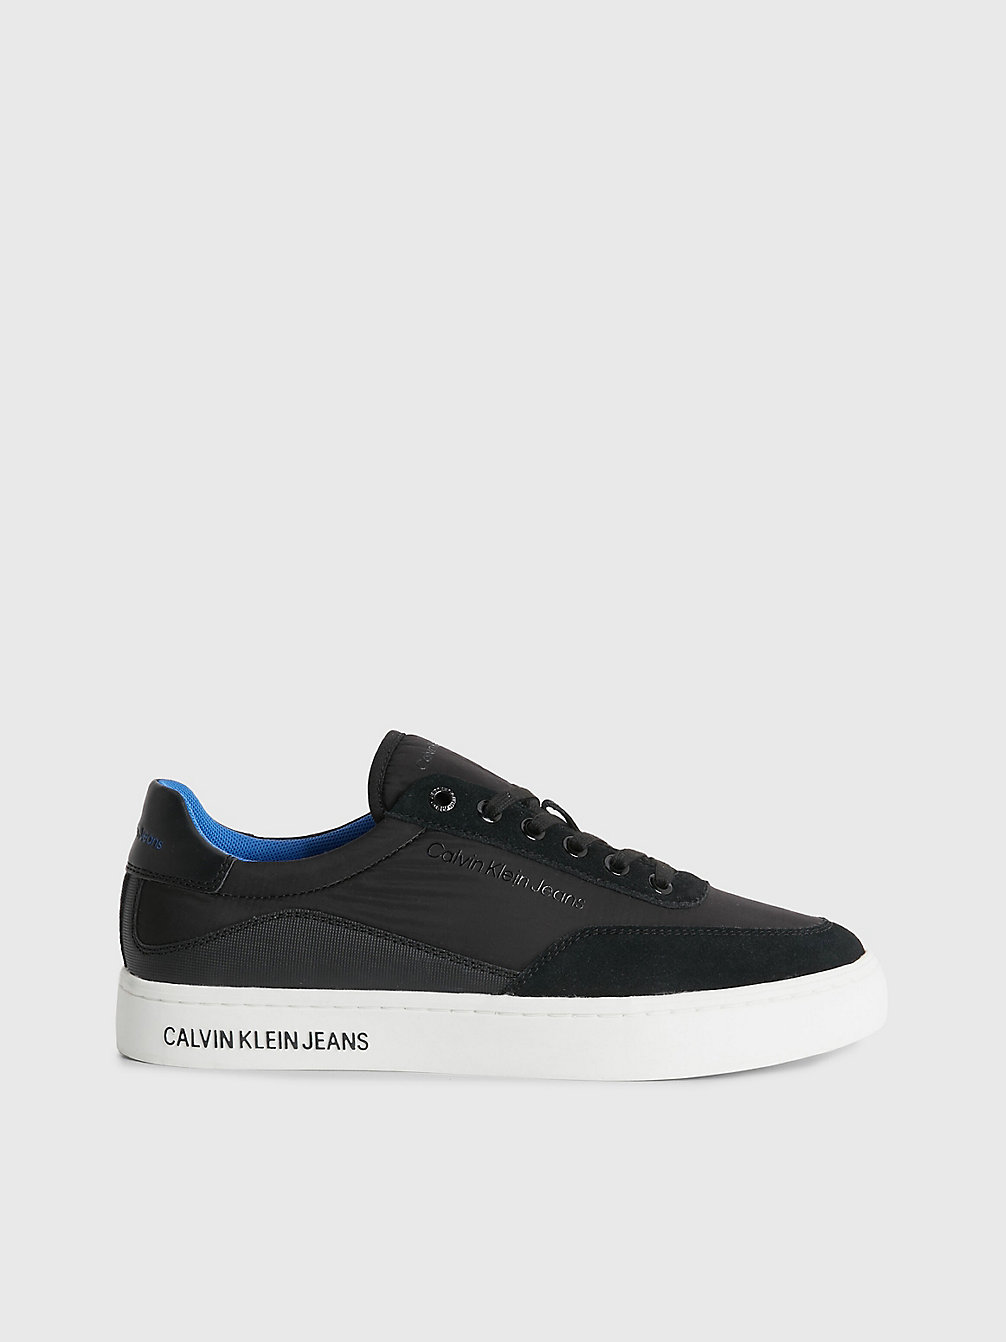 BLACK/IMPERIAL BLU > Recycled Trainers > undefined Женщины - Calvin Klein